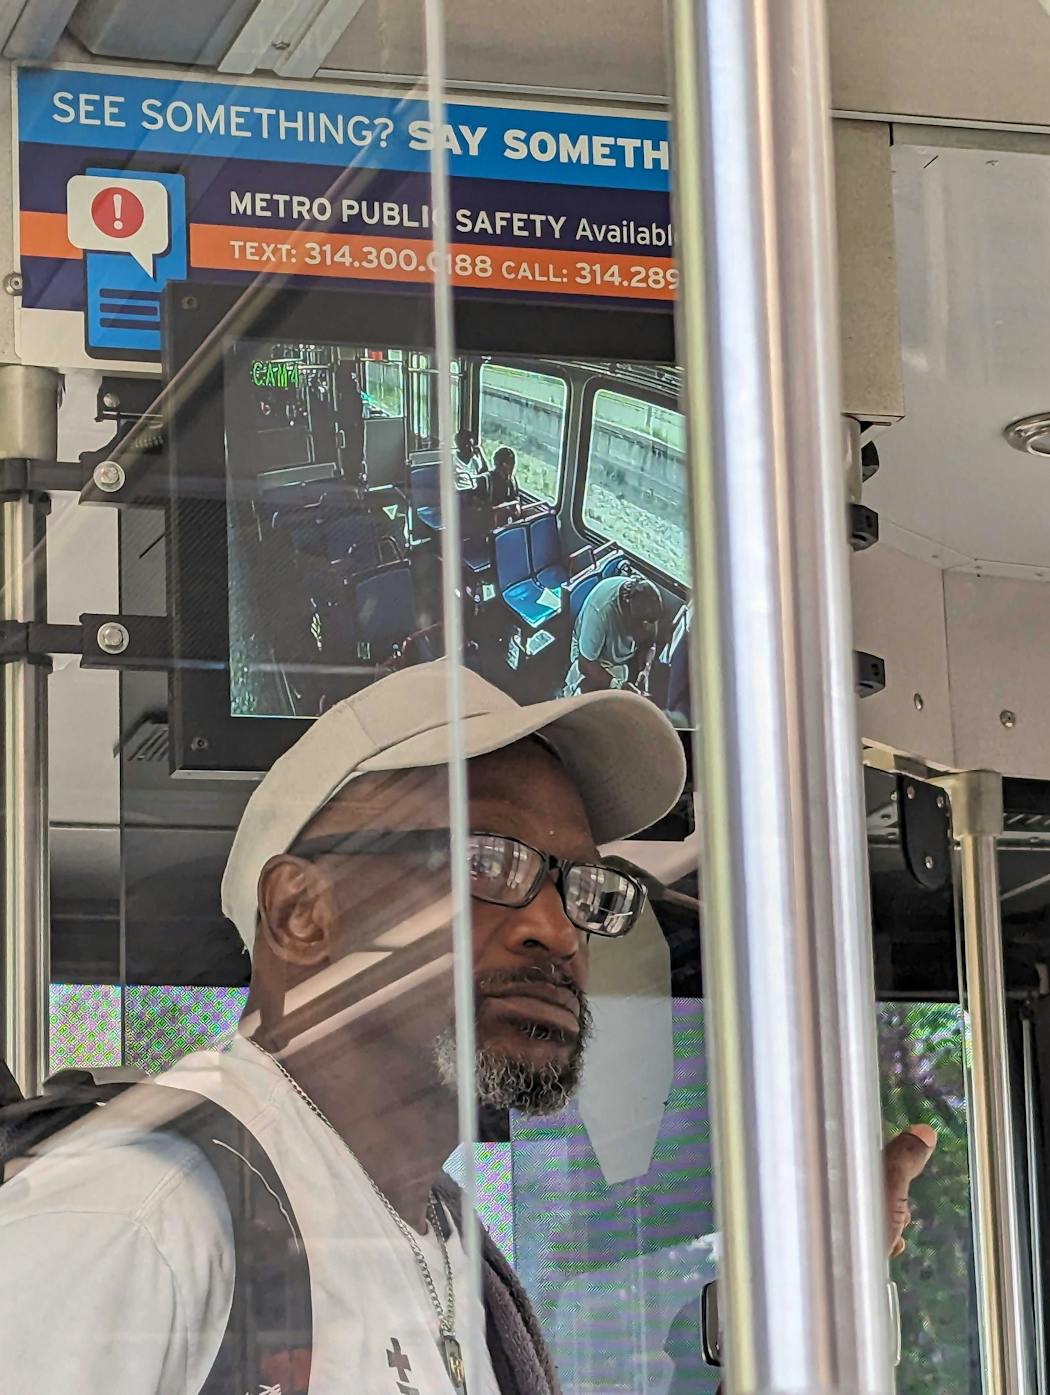 High-resolution color television monitors sit at the front and back of every car on the St. Louis light-rail system, allowing passengers to easily see not only themselves but what is happening in front of and behind them.